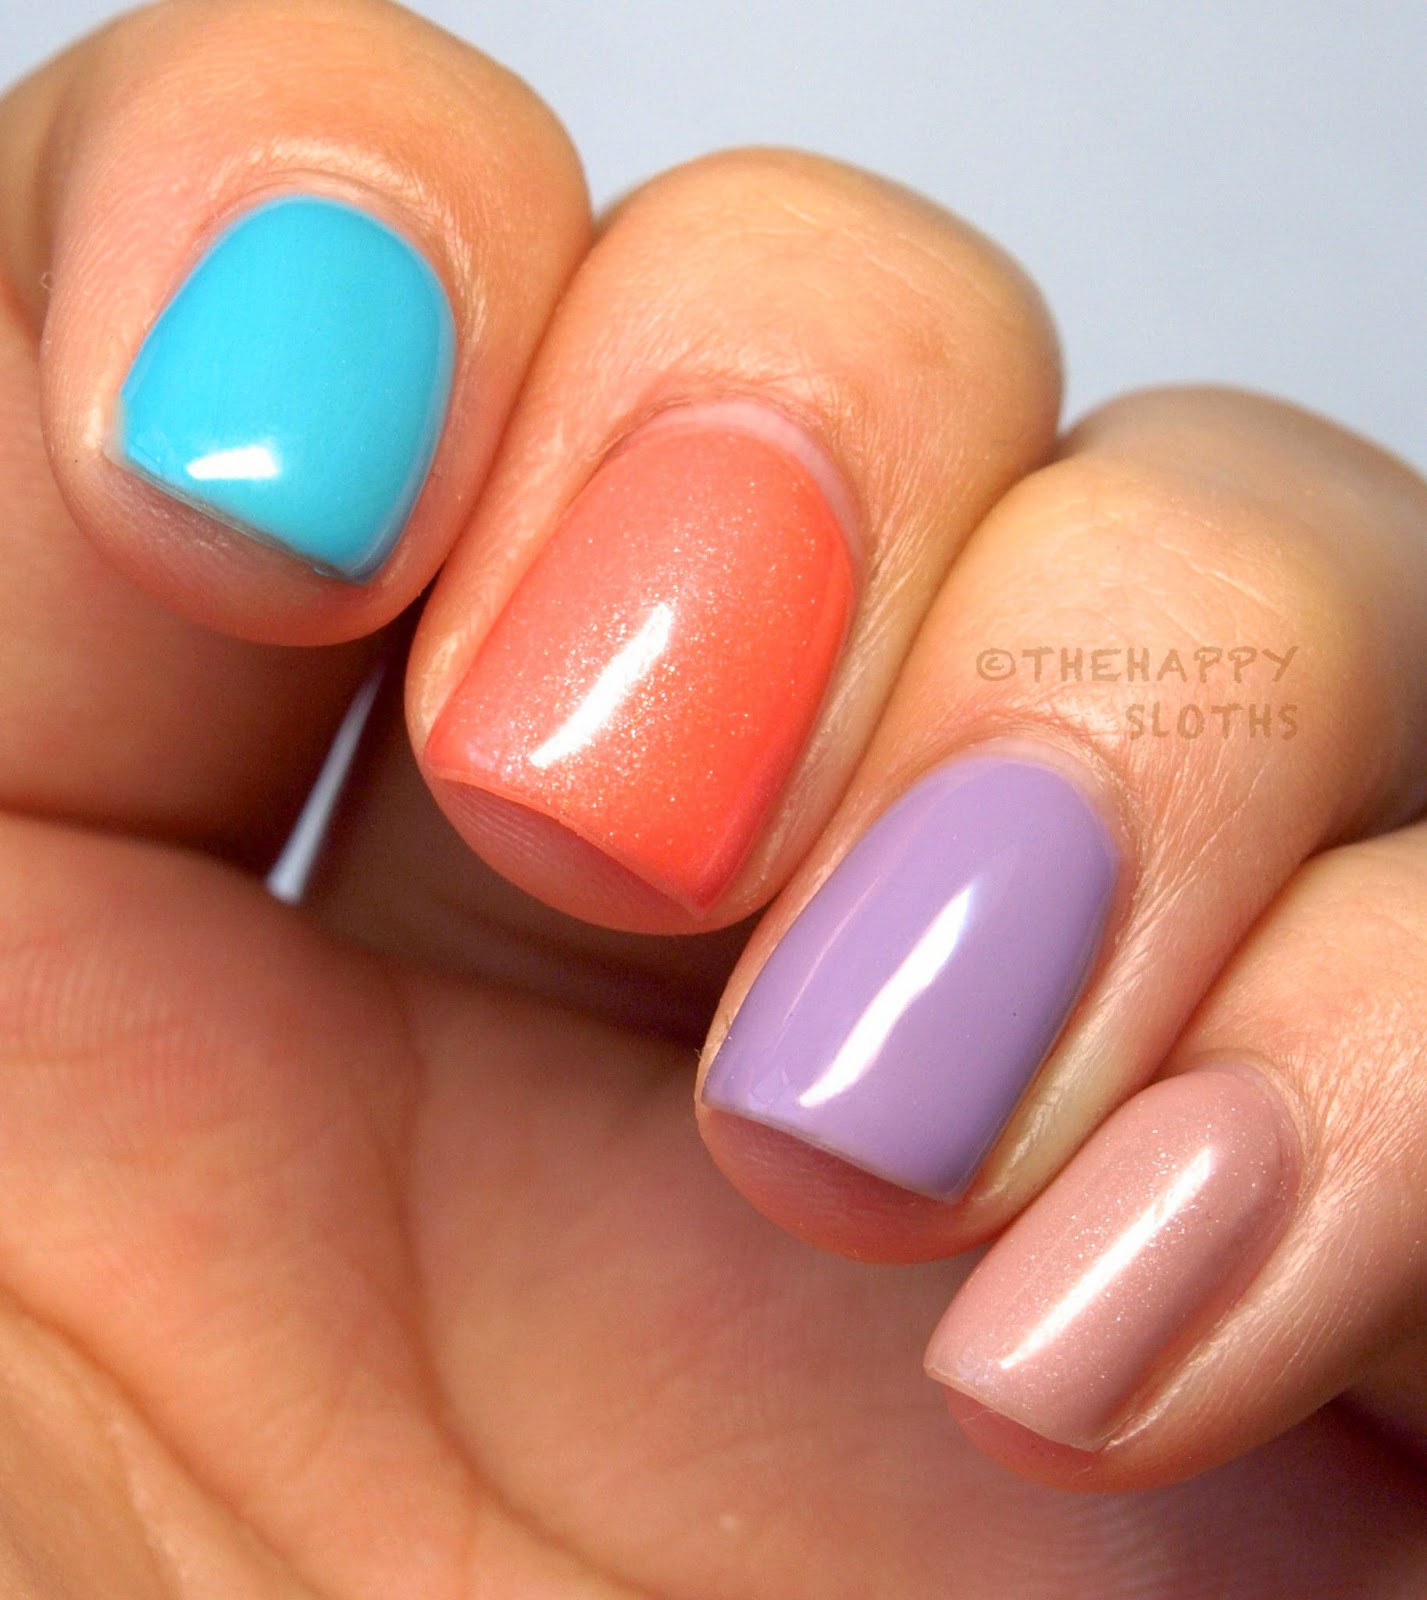 Sally Hansen Salon Gel Polish Collection for Mother's Day Swatches and Review